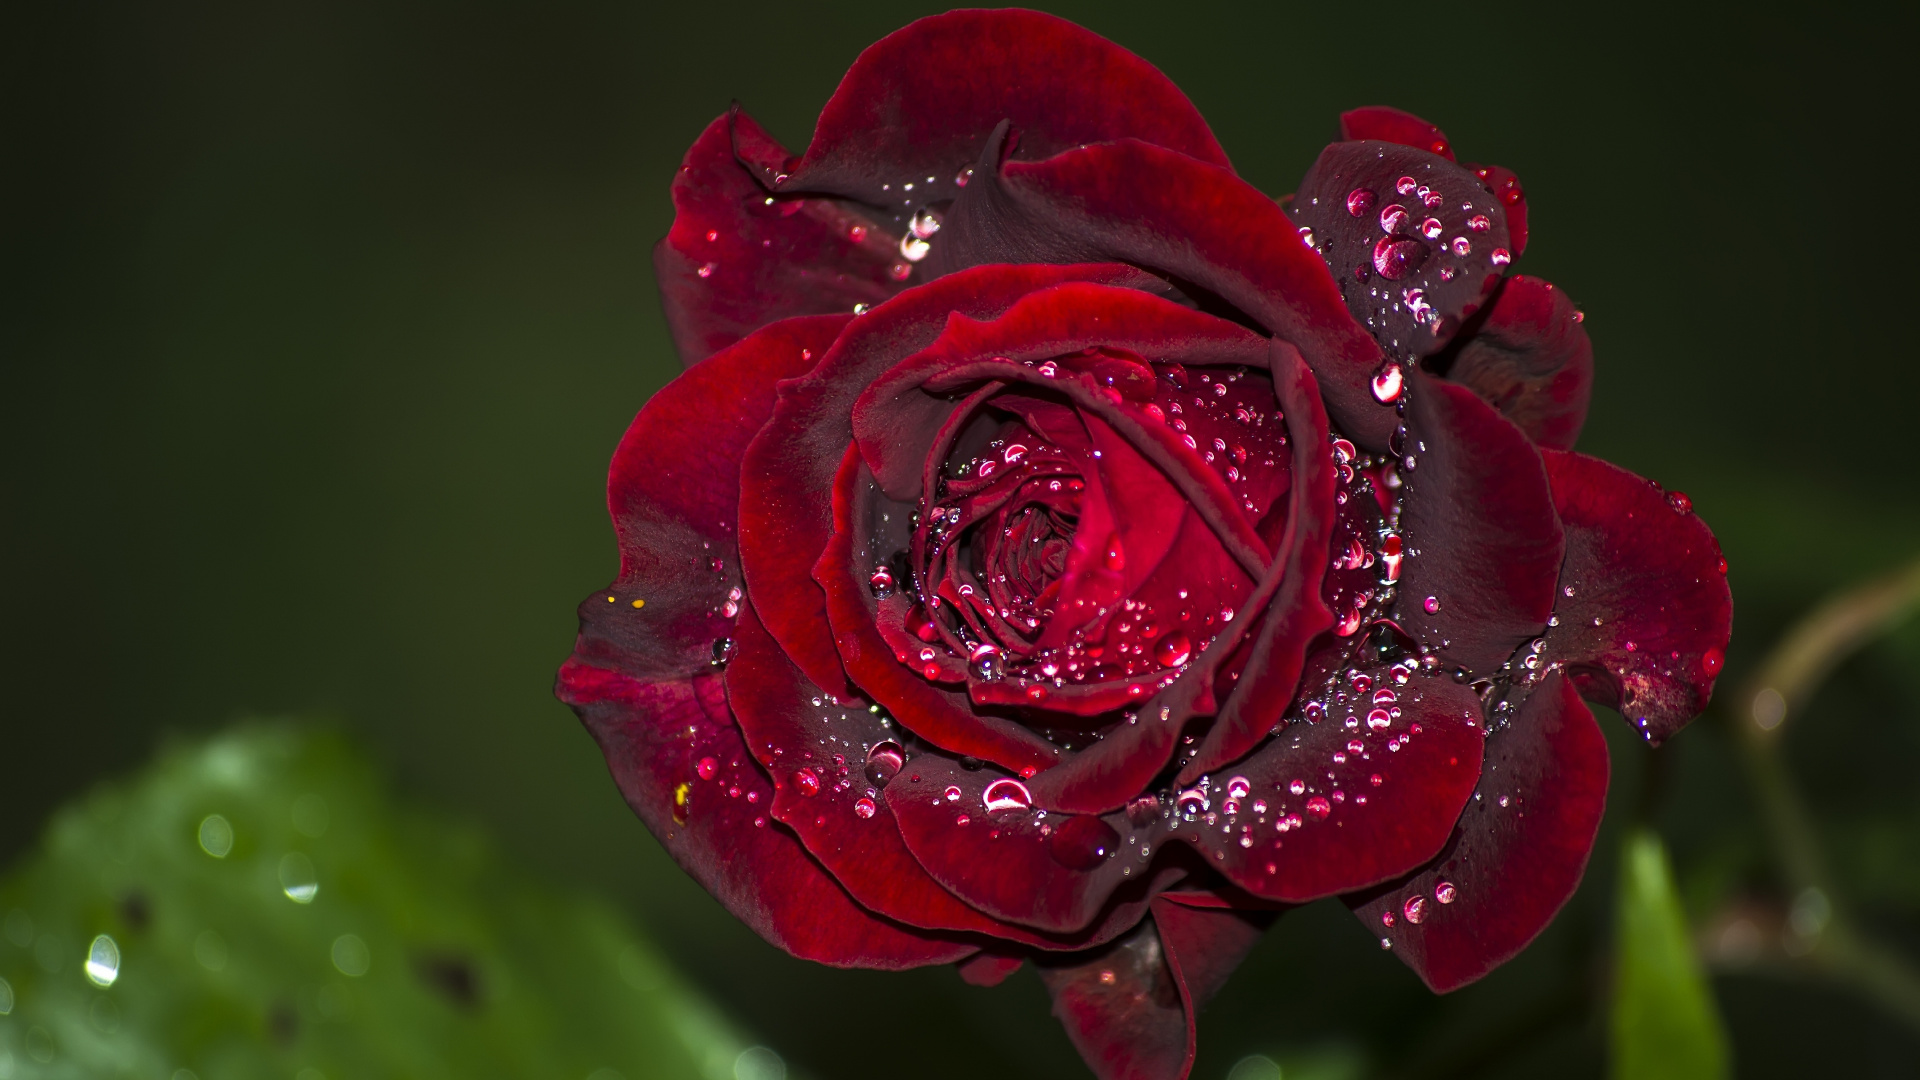 Red Rose in Bloom With Dew Drops. Wallpaper in 1920x1080 Resolution